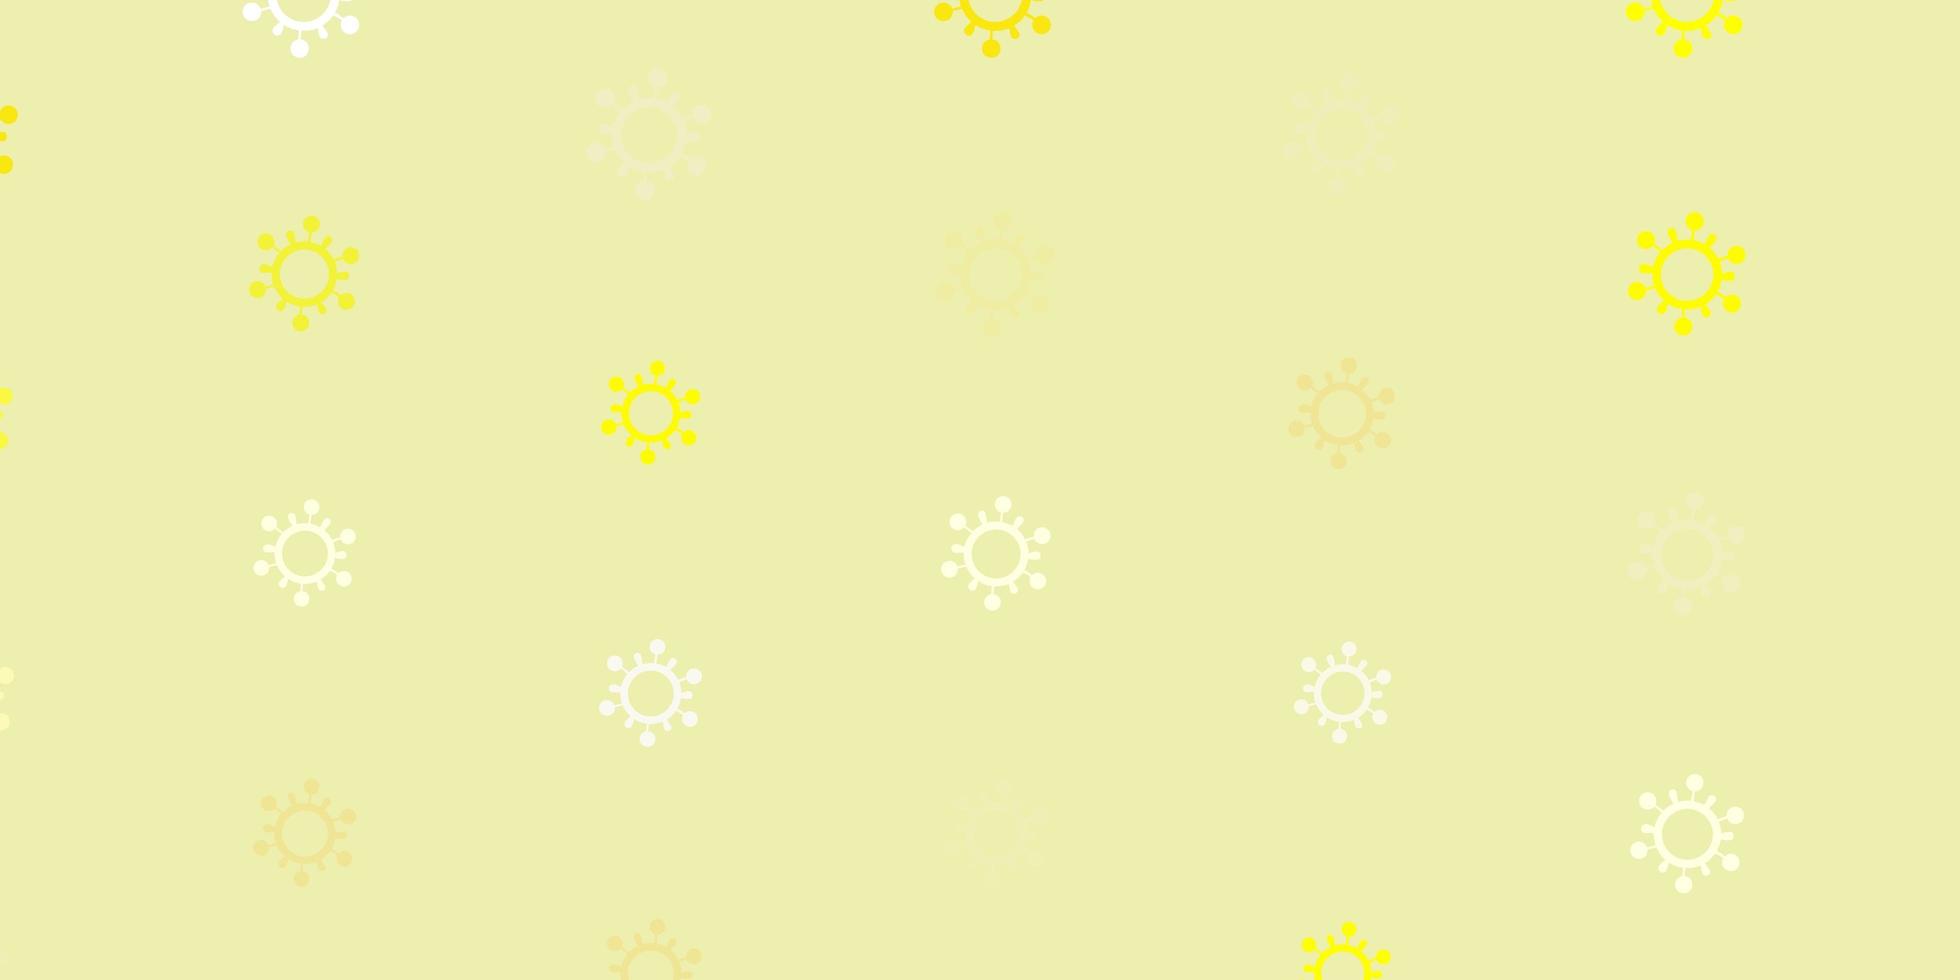 Light Yellow vector background with covid-19 symbols